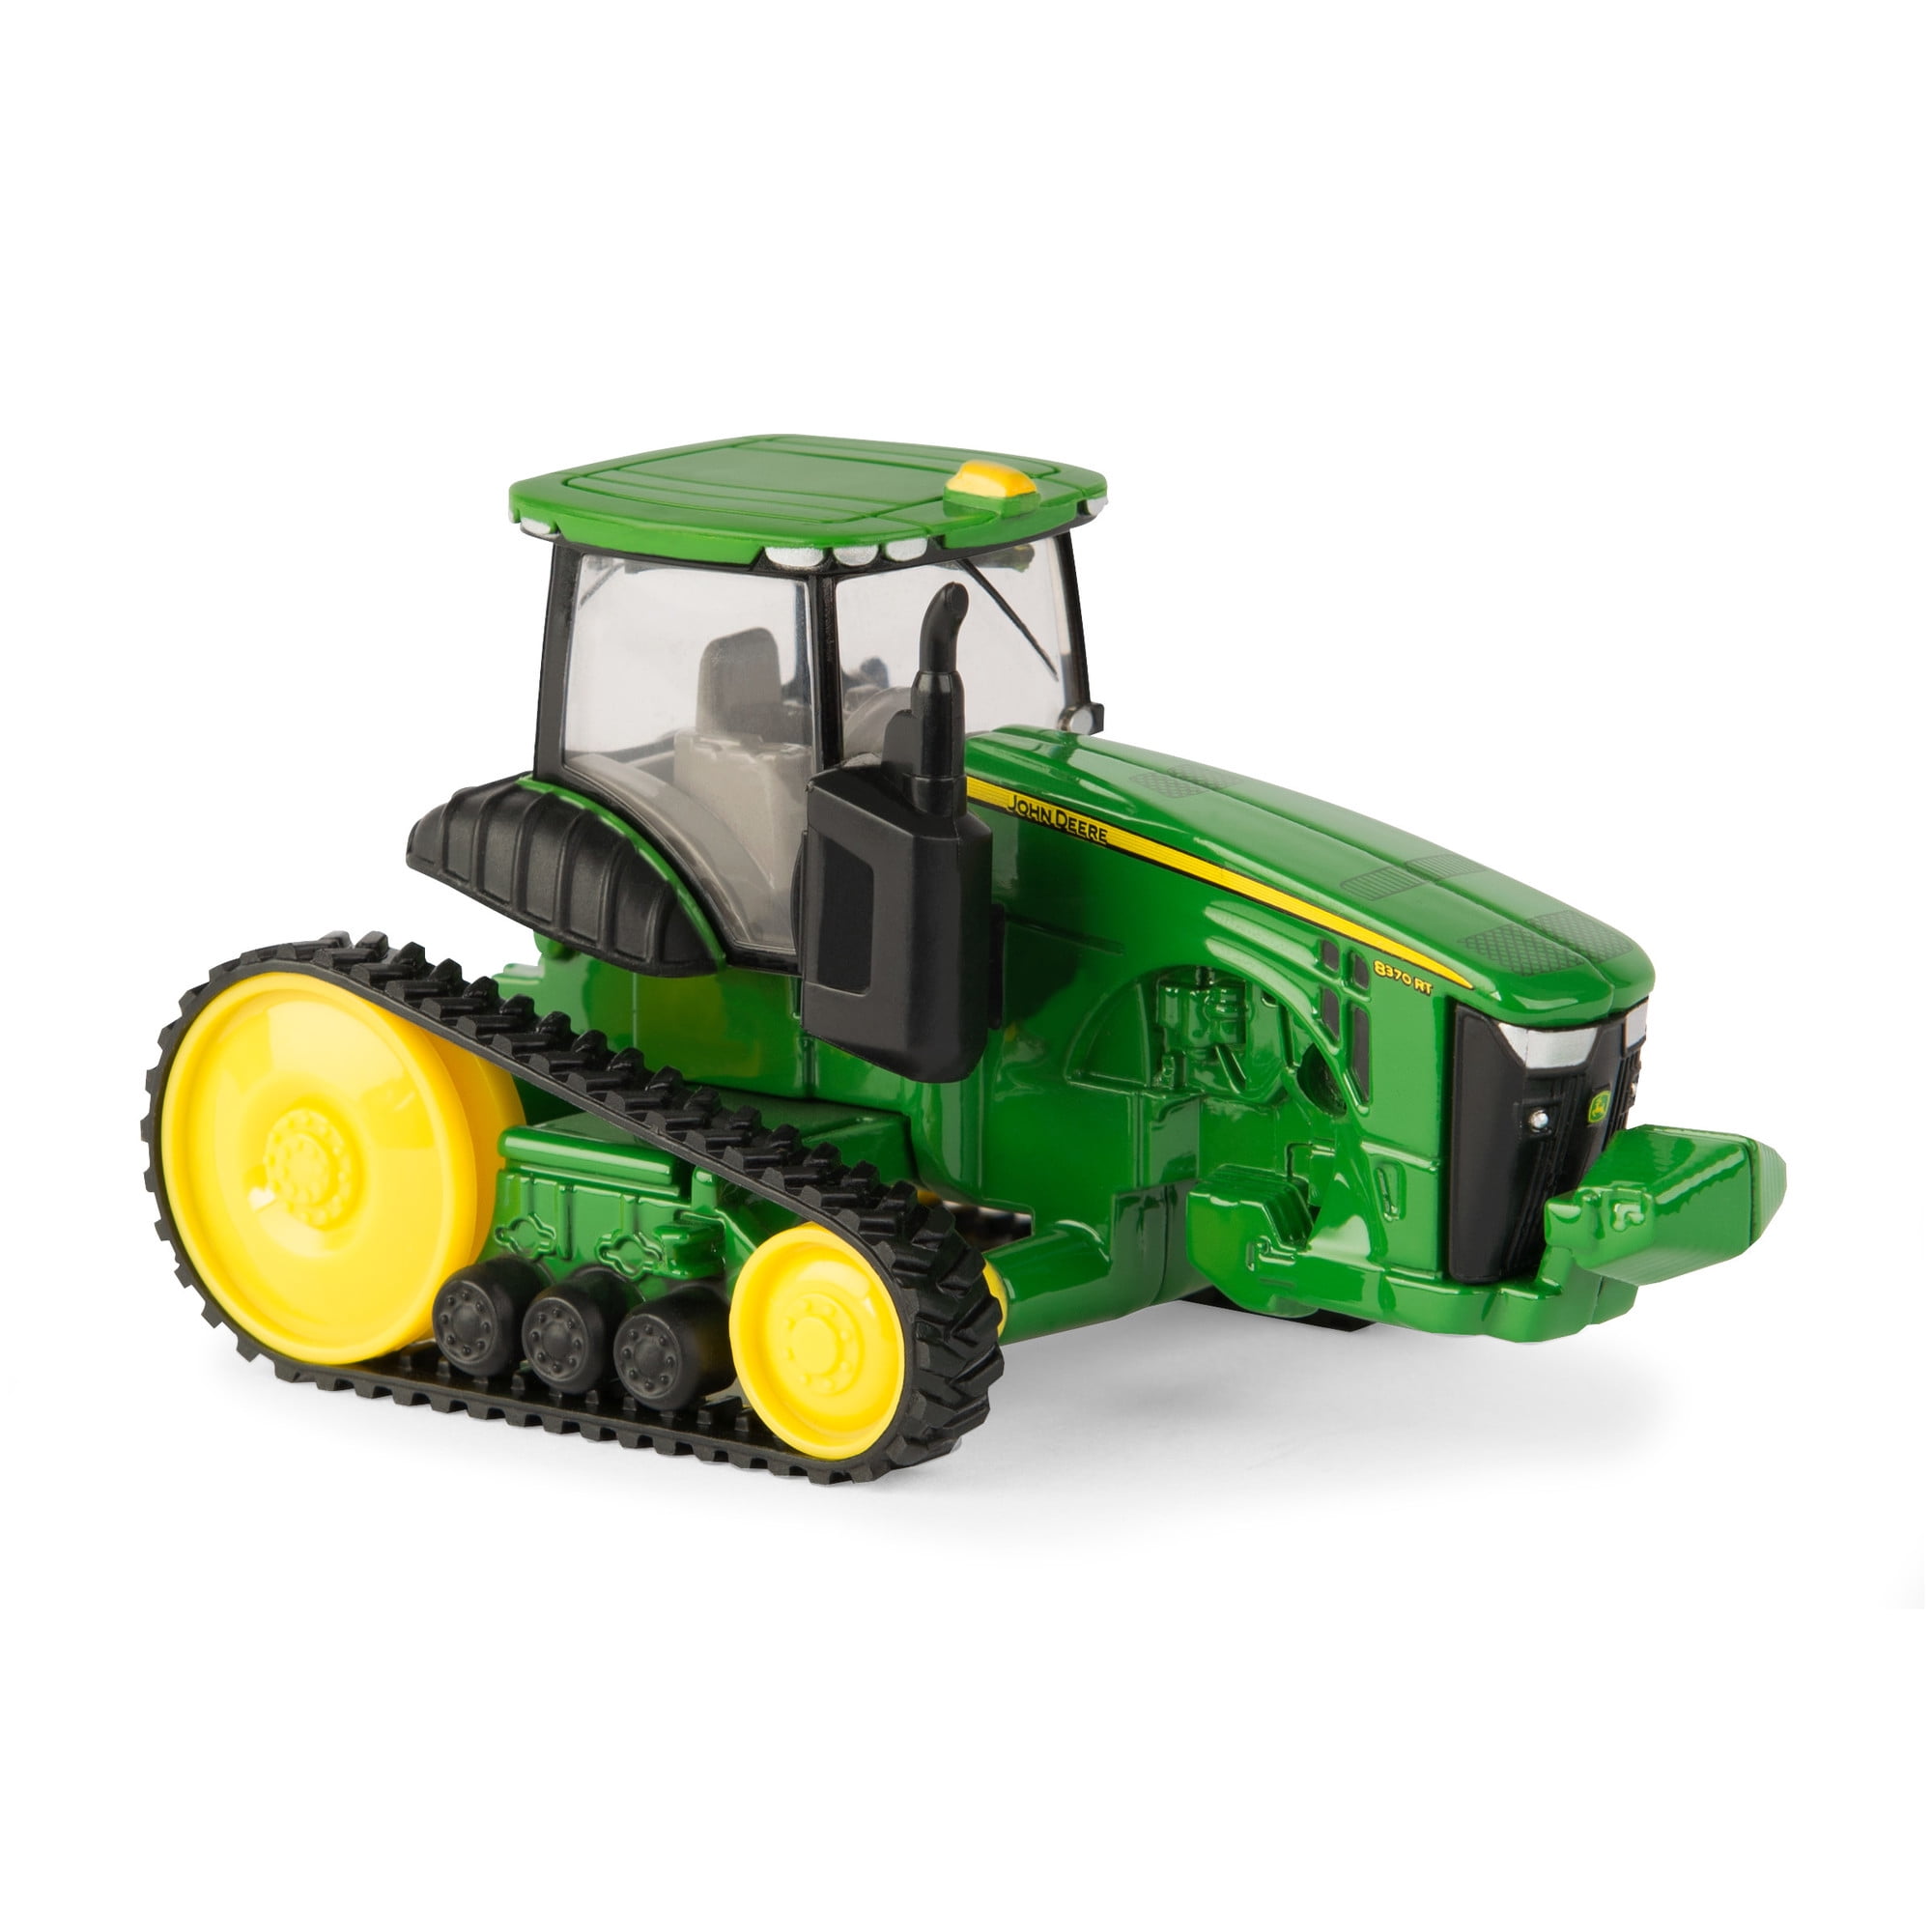 1/64 John Deere Unstyled Model A Tractor Toy by Ertl Diecast LP64352 Lot#EB71